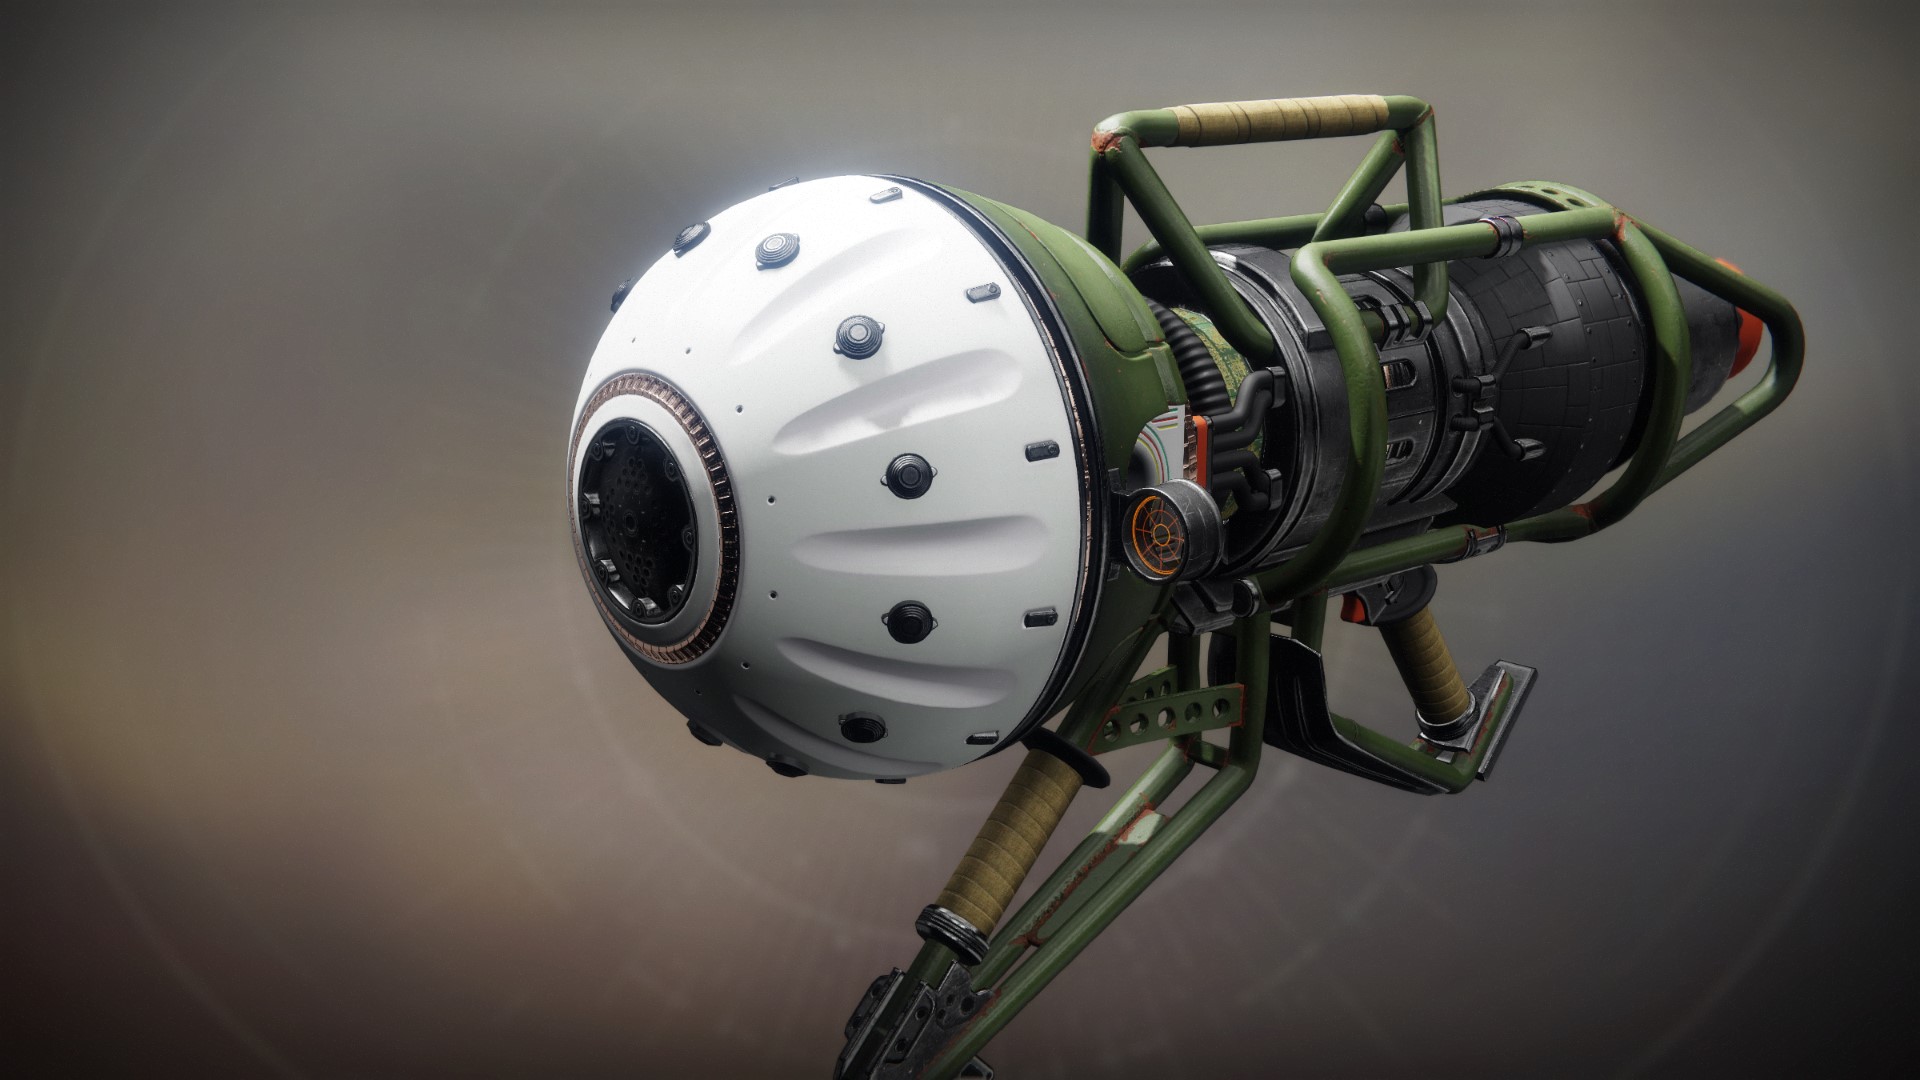 An in-game render of the Vostok.